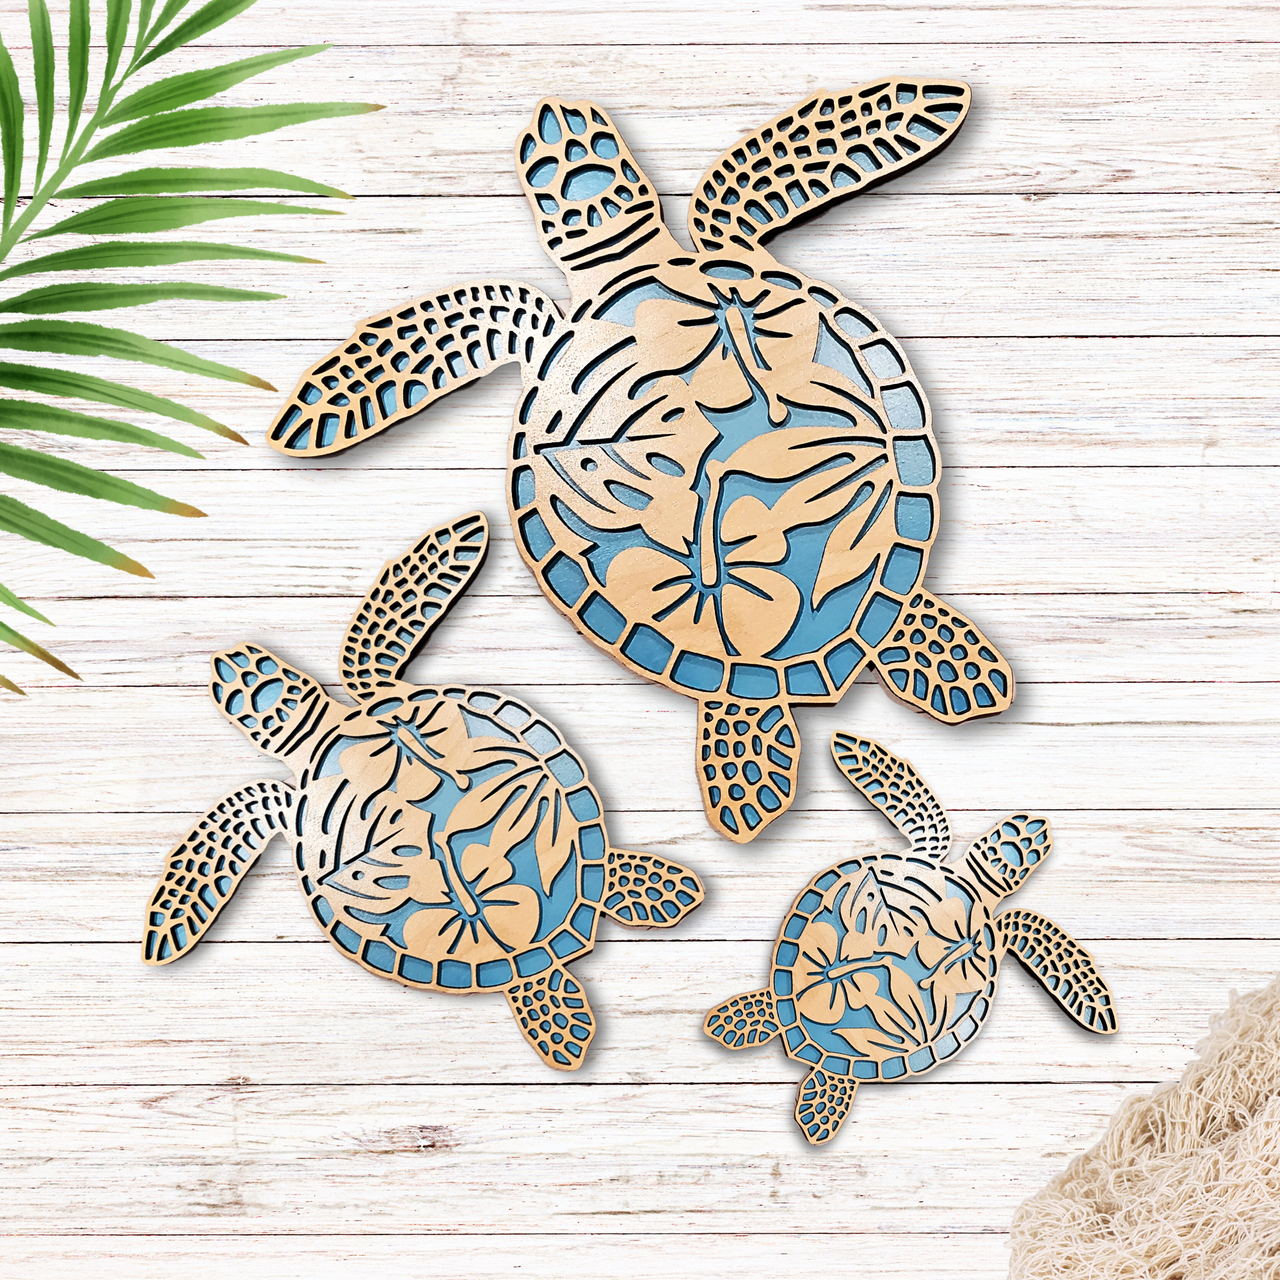 Sea Turtle Stamped Cross Stitch Kits - Needlepoint Counted Cross